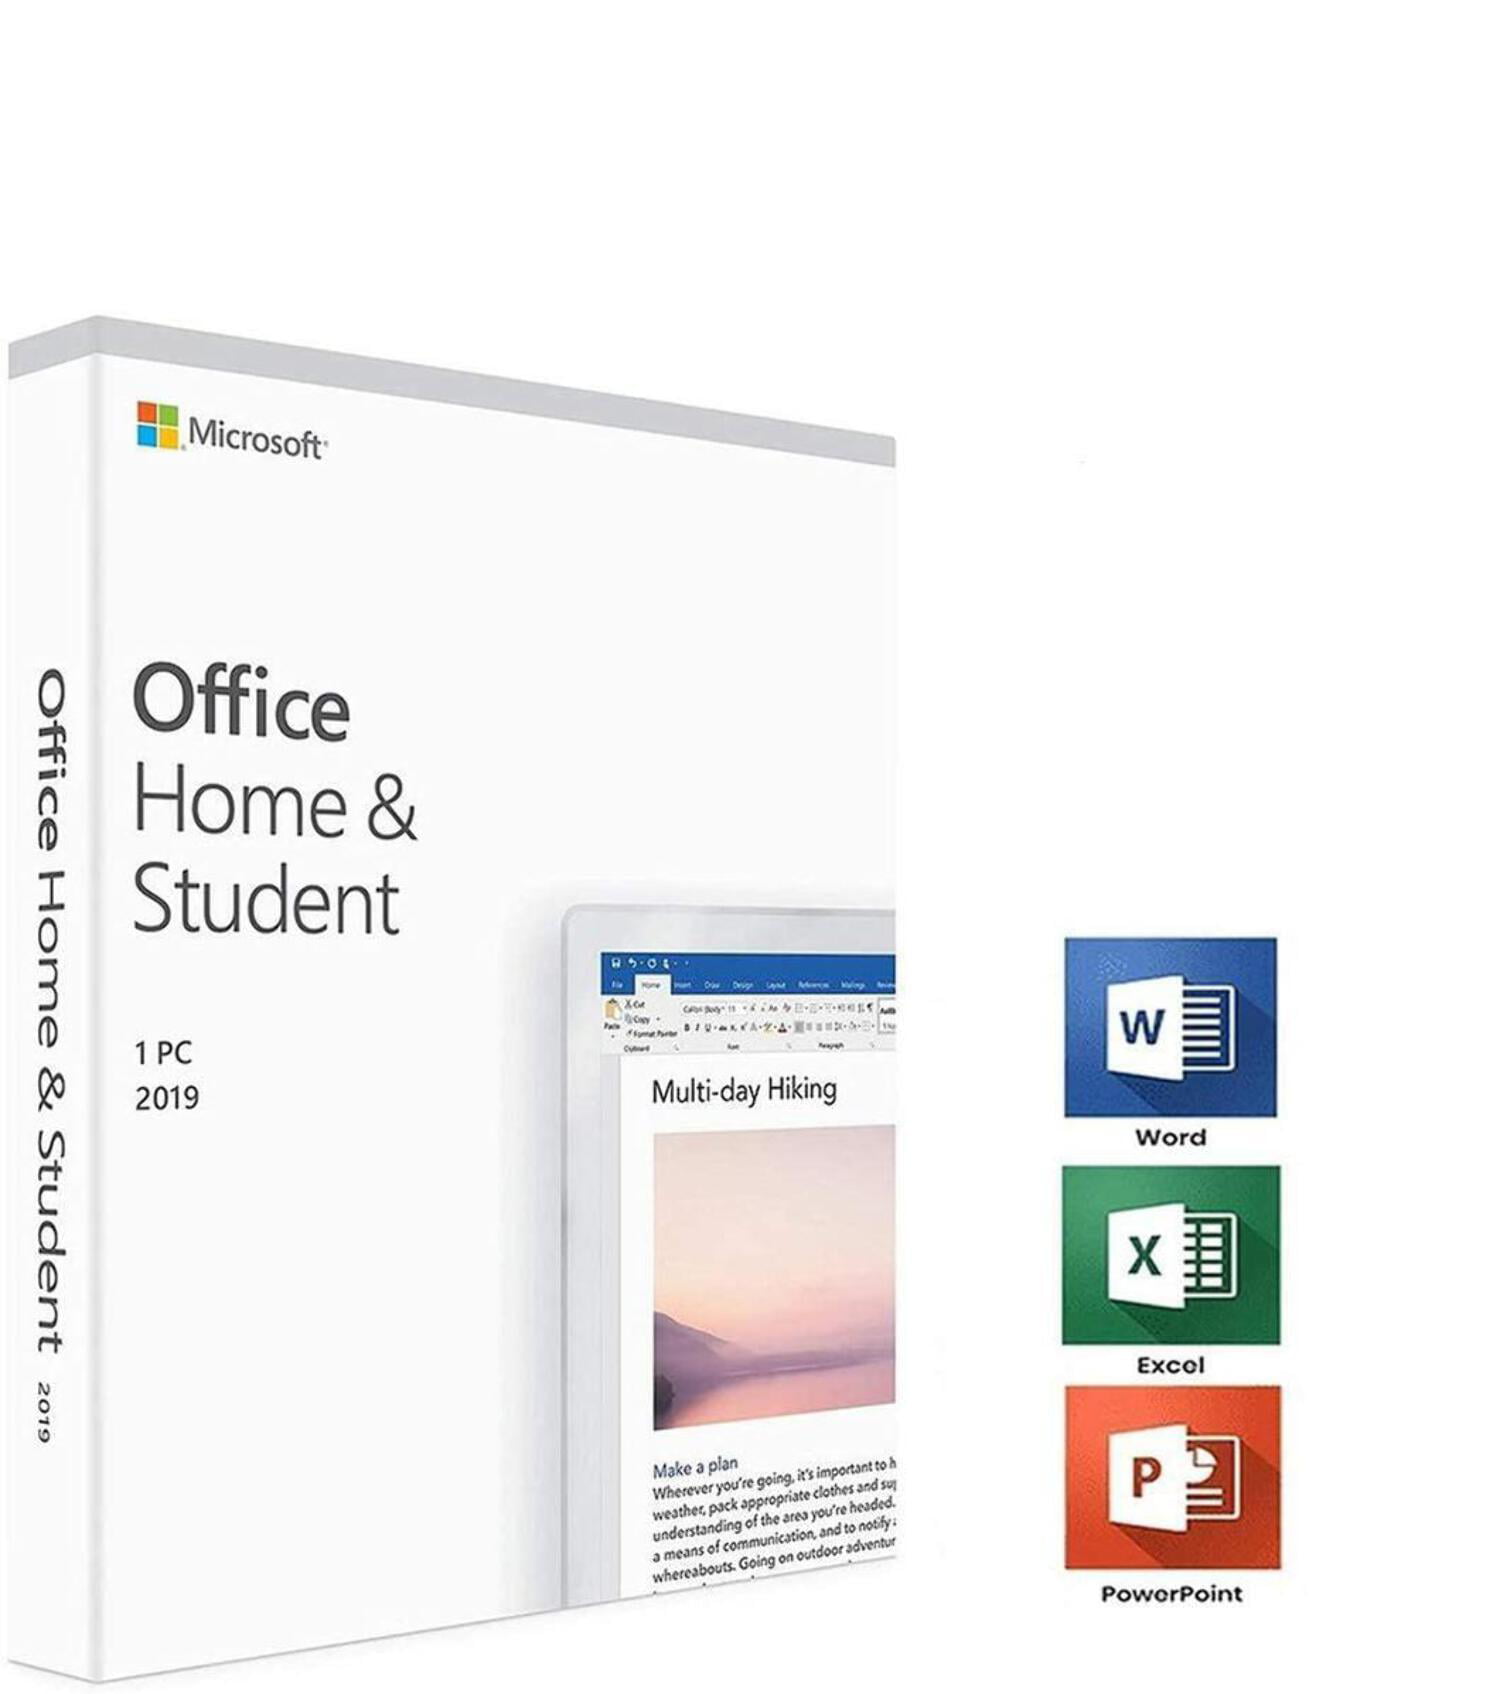 Microsoft Office Home and Student 2019 - 1 PC Windows Software